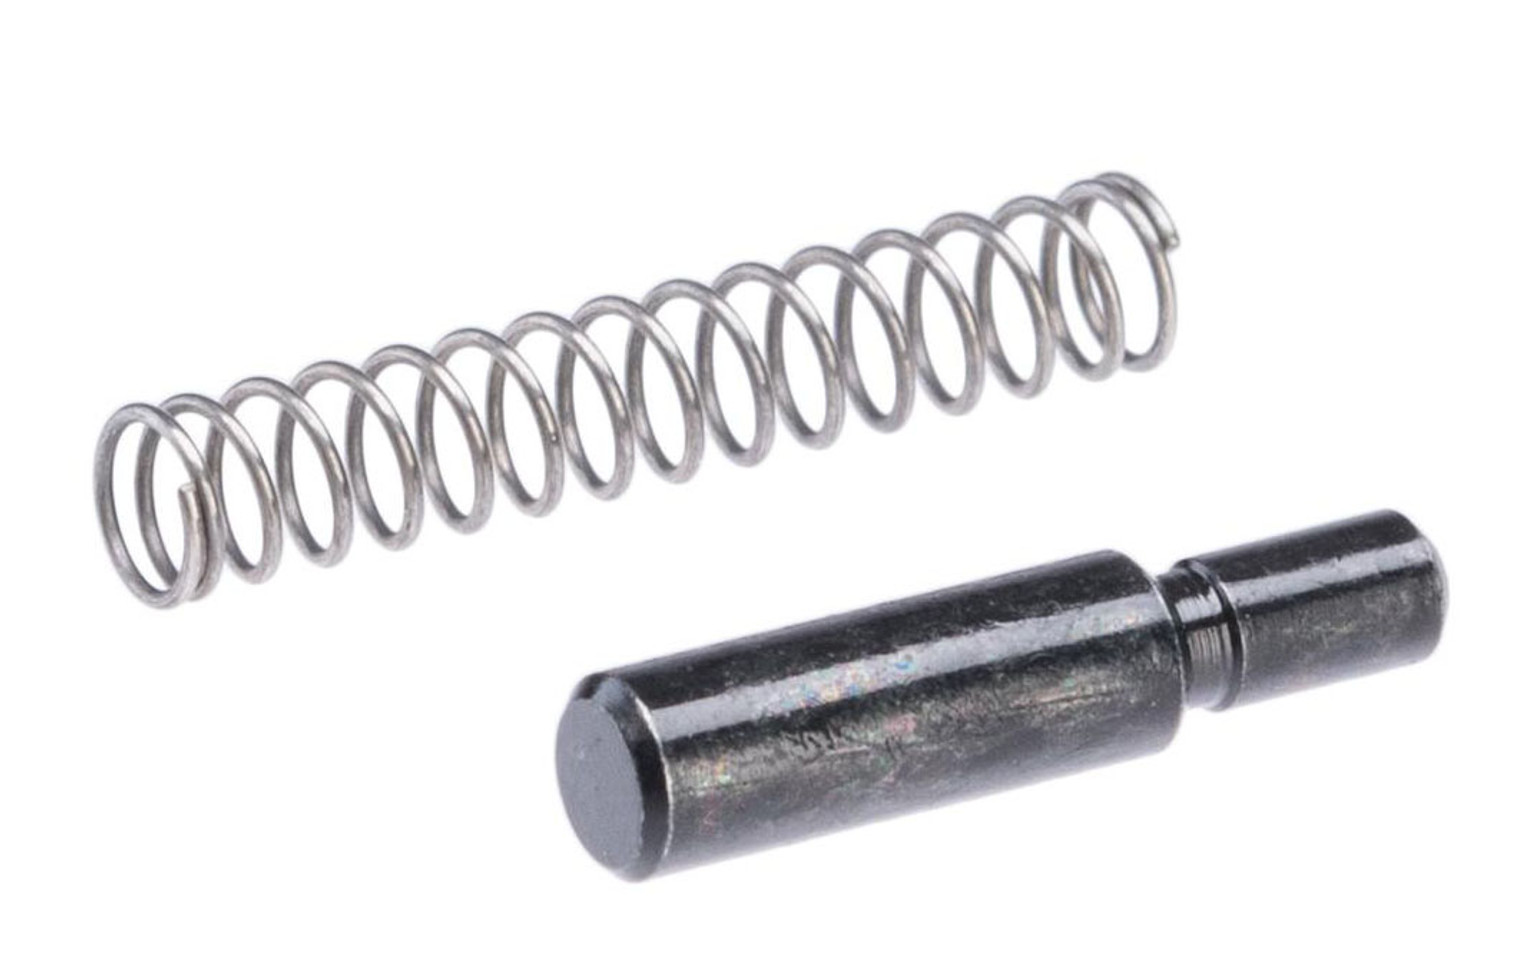 CYMA Flash Hider Retainer Pin and Spring for Airsoft AK Series AEGs